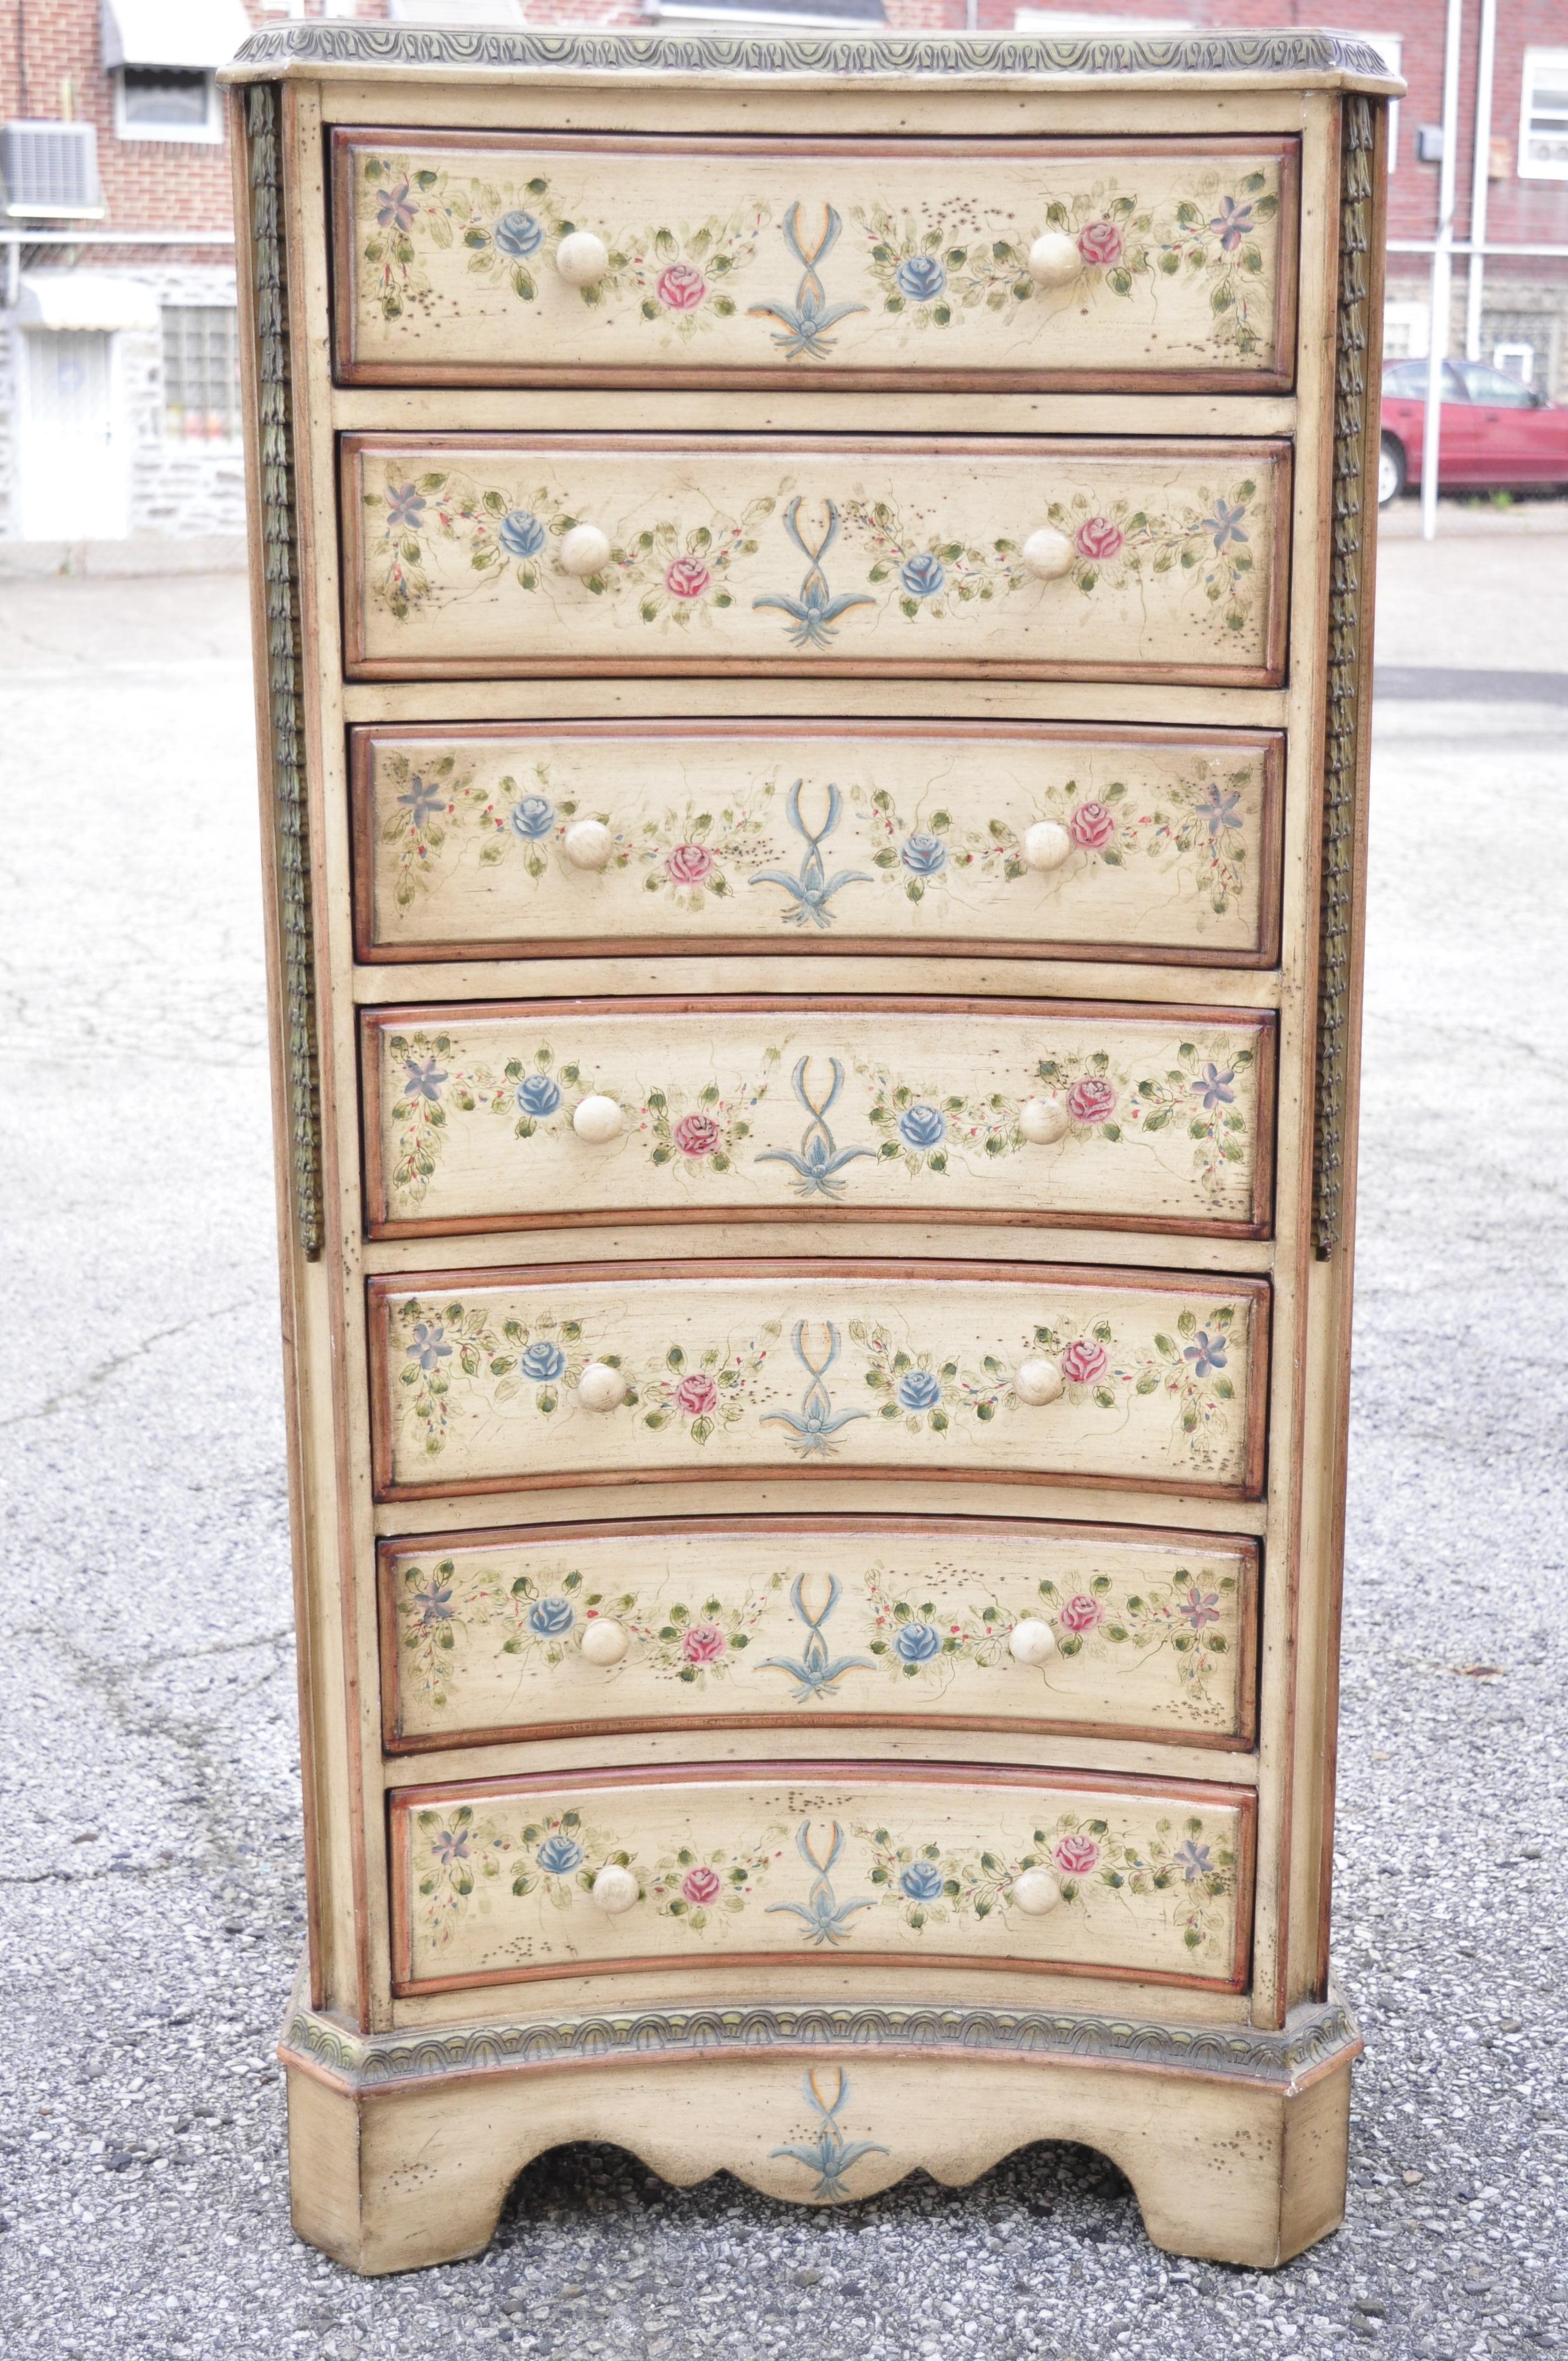 French Country style chic and shabby 7 drawer cream and flower Lingerie tall chest. Item features cream distress painted finish, floral painted drawer fronts, distressed finish, nicely carved details, 7 drawers, very nice vintage item, great style